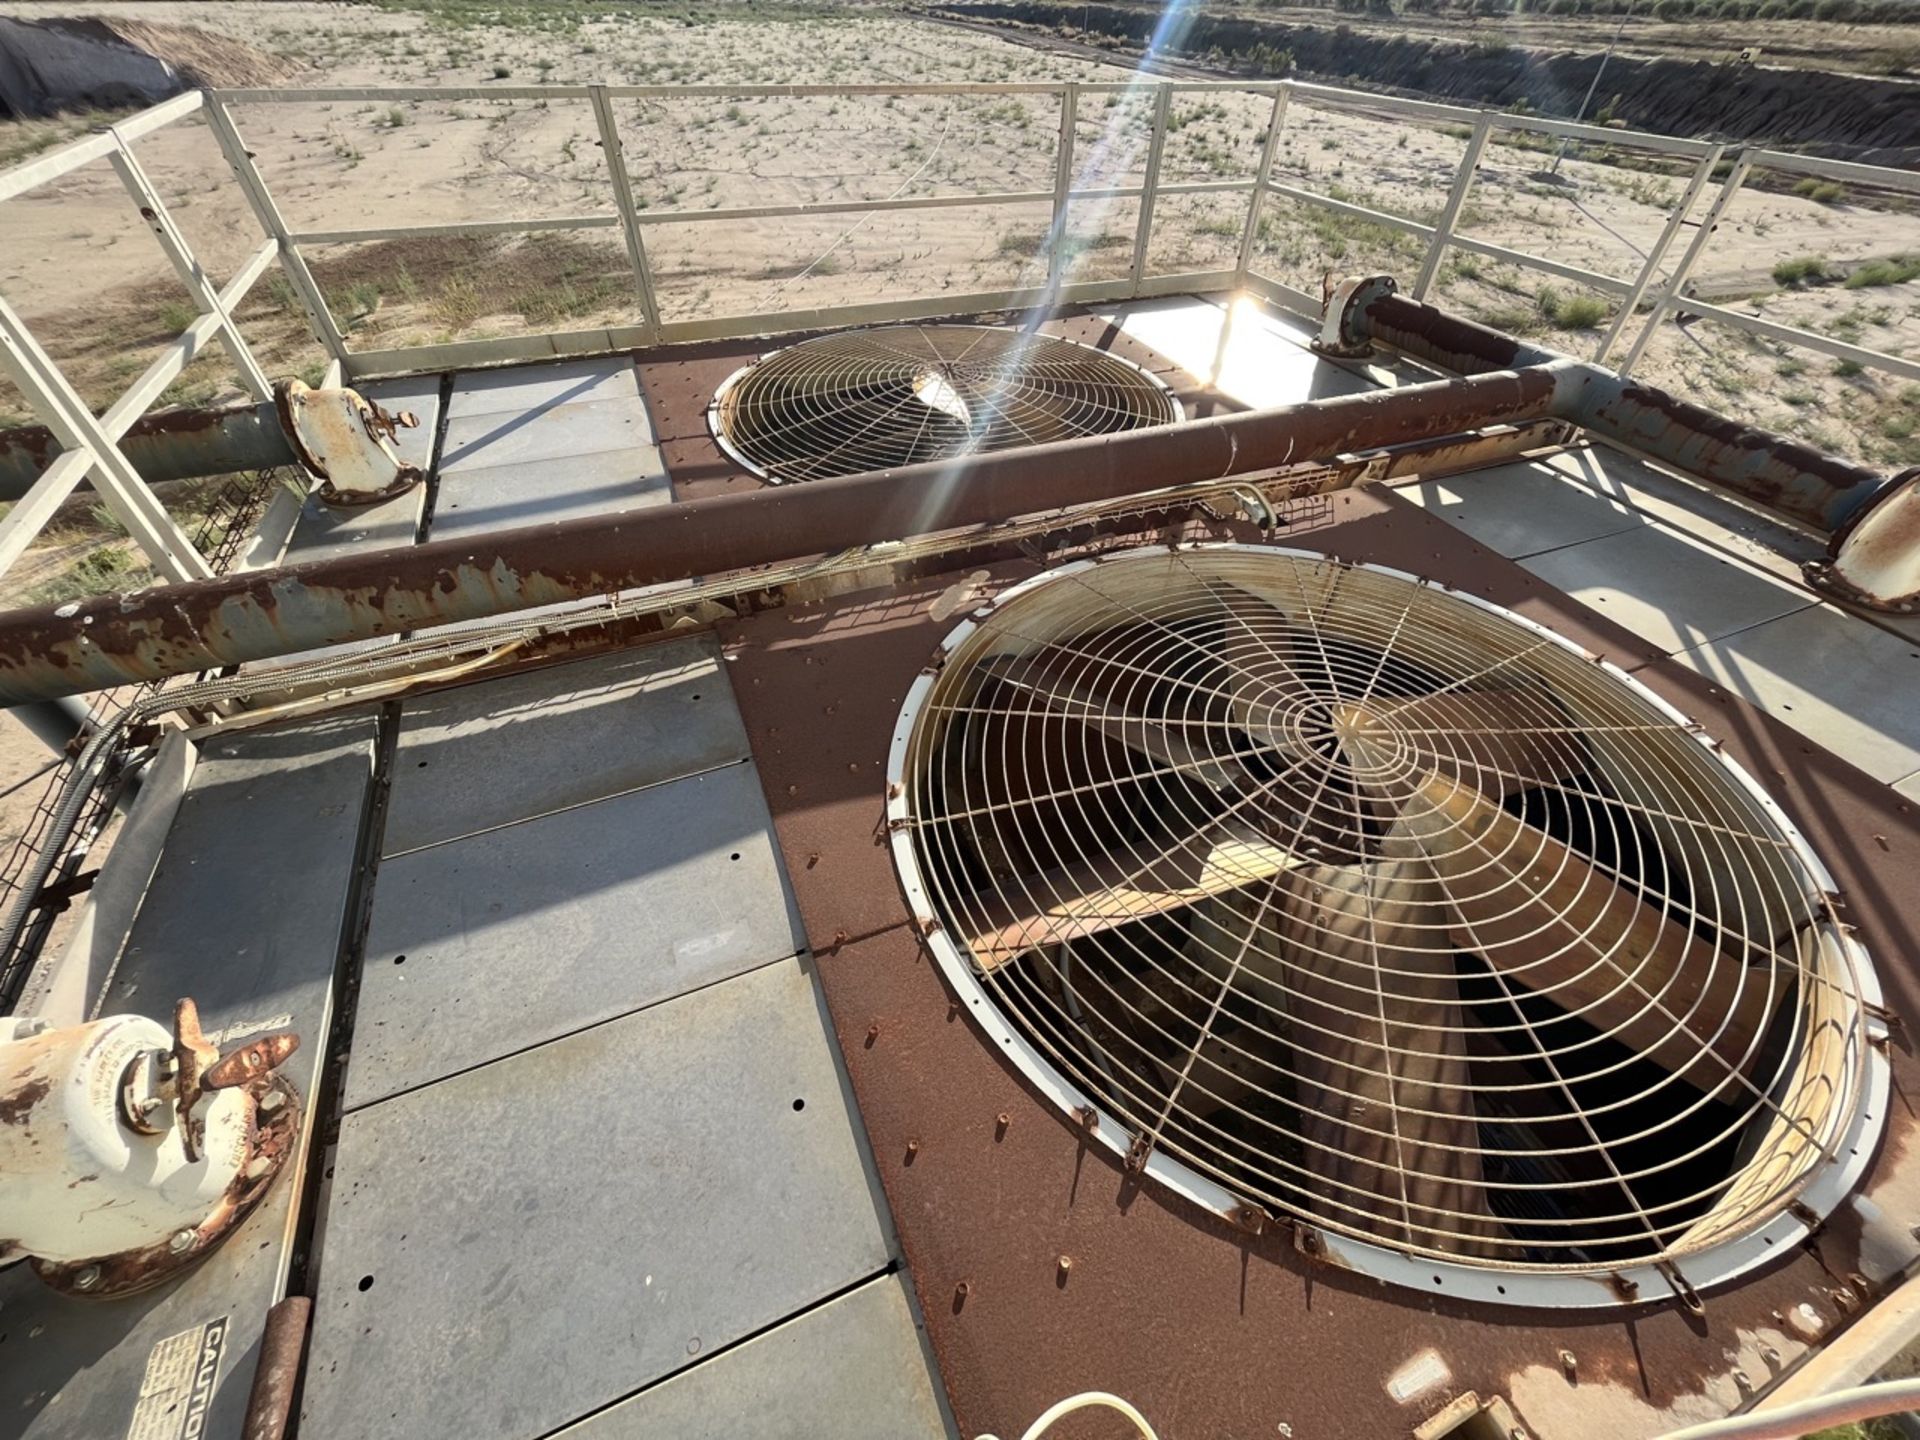 SPX Marley Cooling Tower, Model NC8403TAN2BGF, Series 10090866-A2-NC8403BG-14, Year 2009; 1 cell 25 - Image 13 of 23